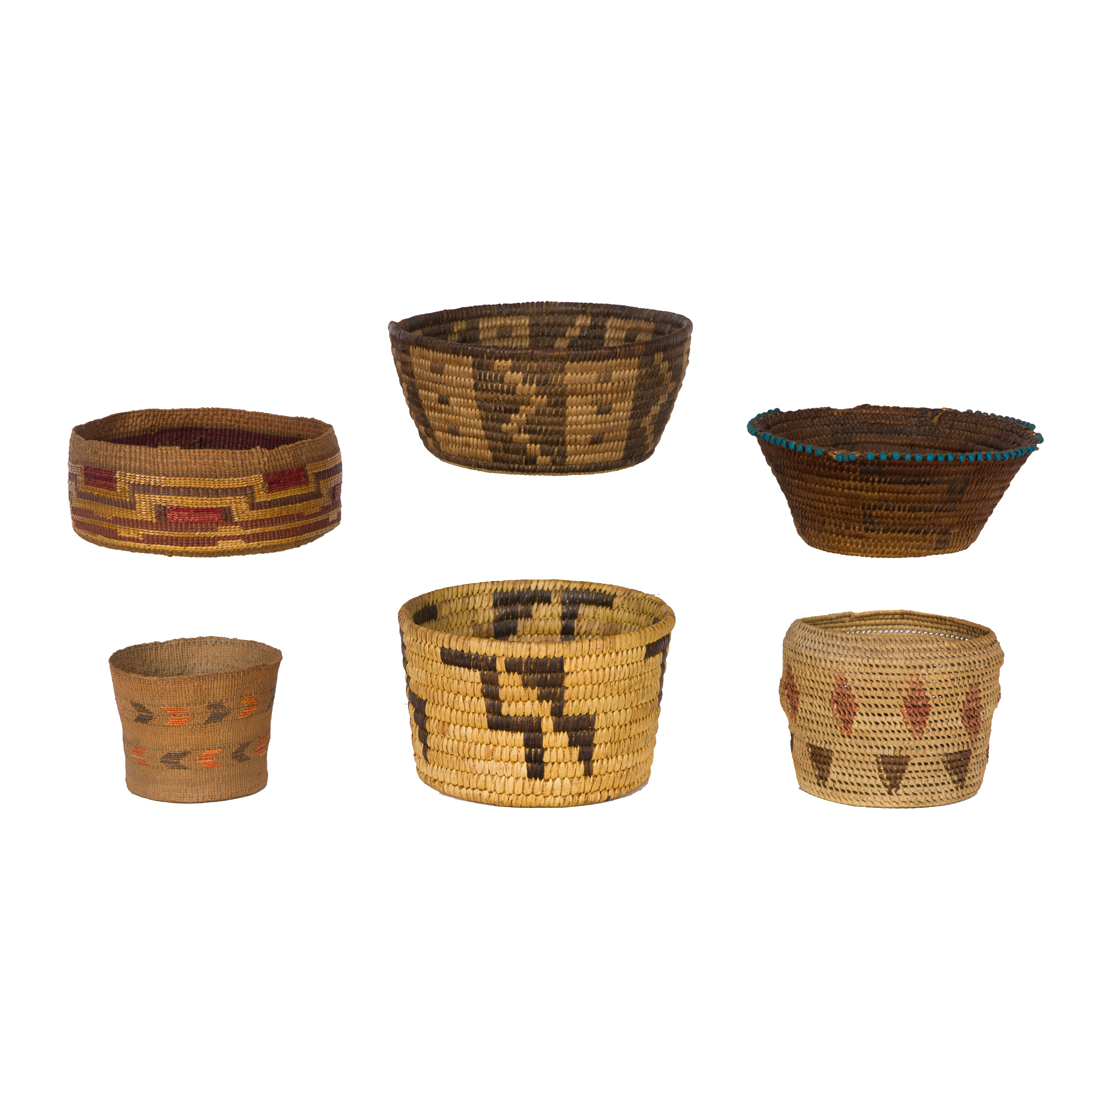 (LOT OF 5) BASKETRY GROUP, INCLUDING